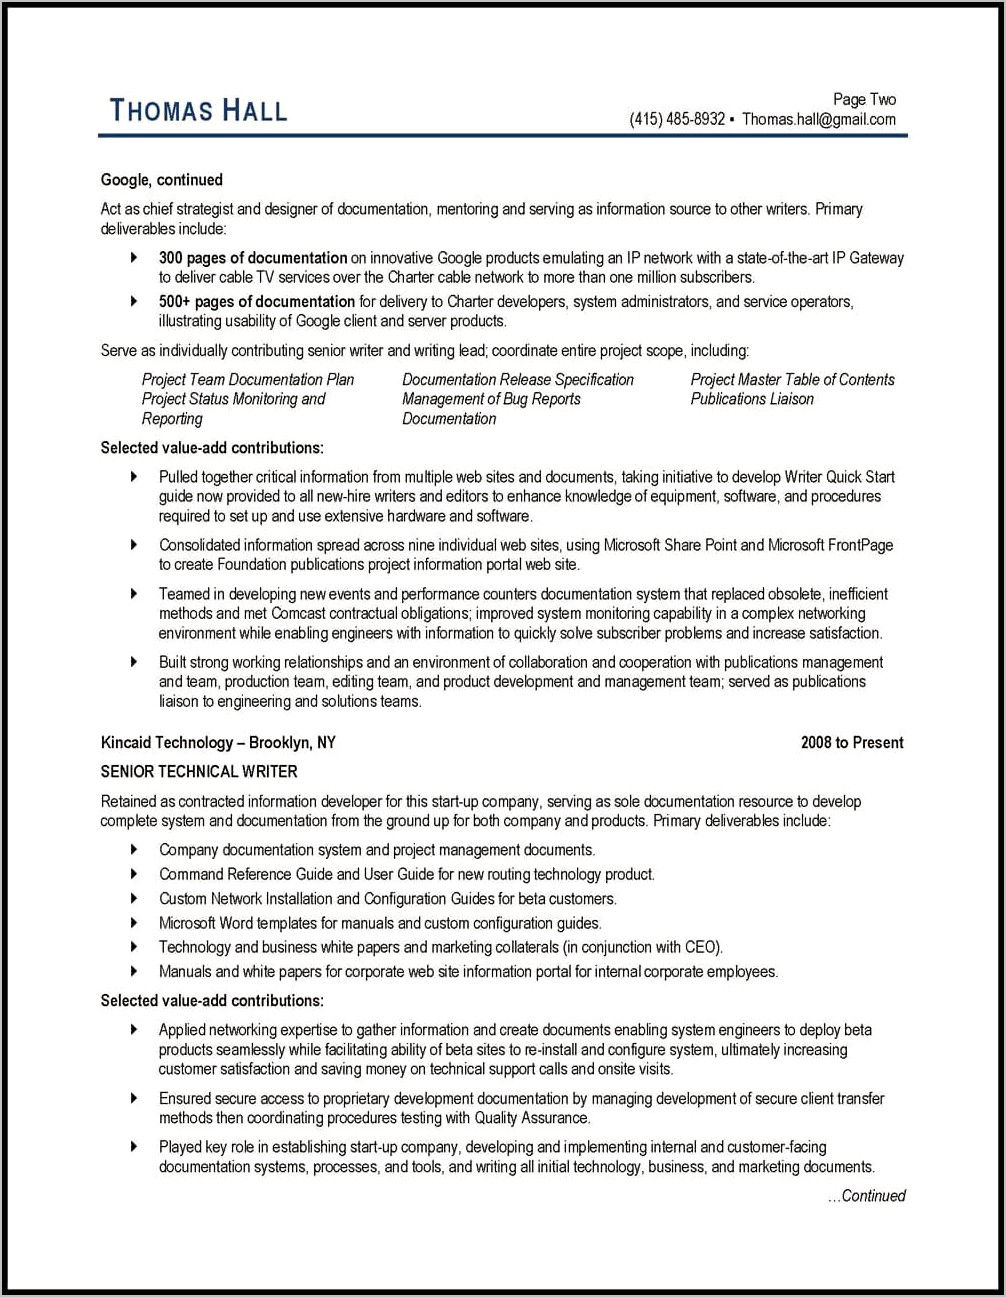 Resume Objective Technical Writer Example